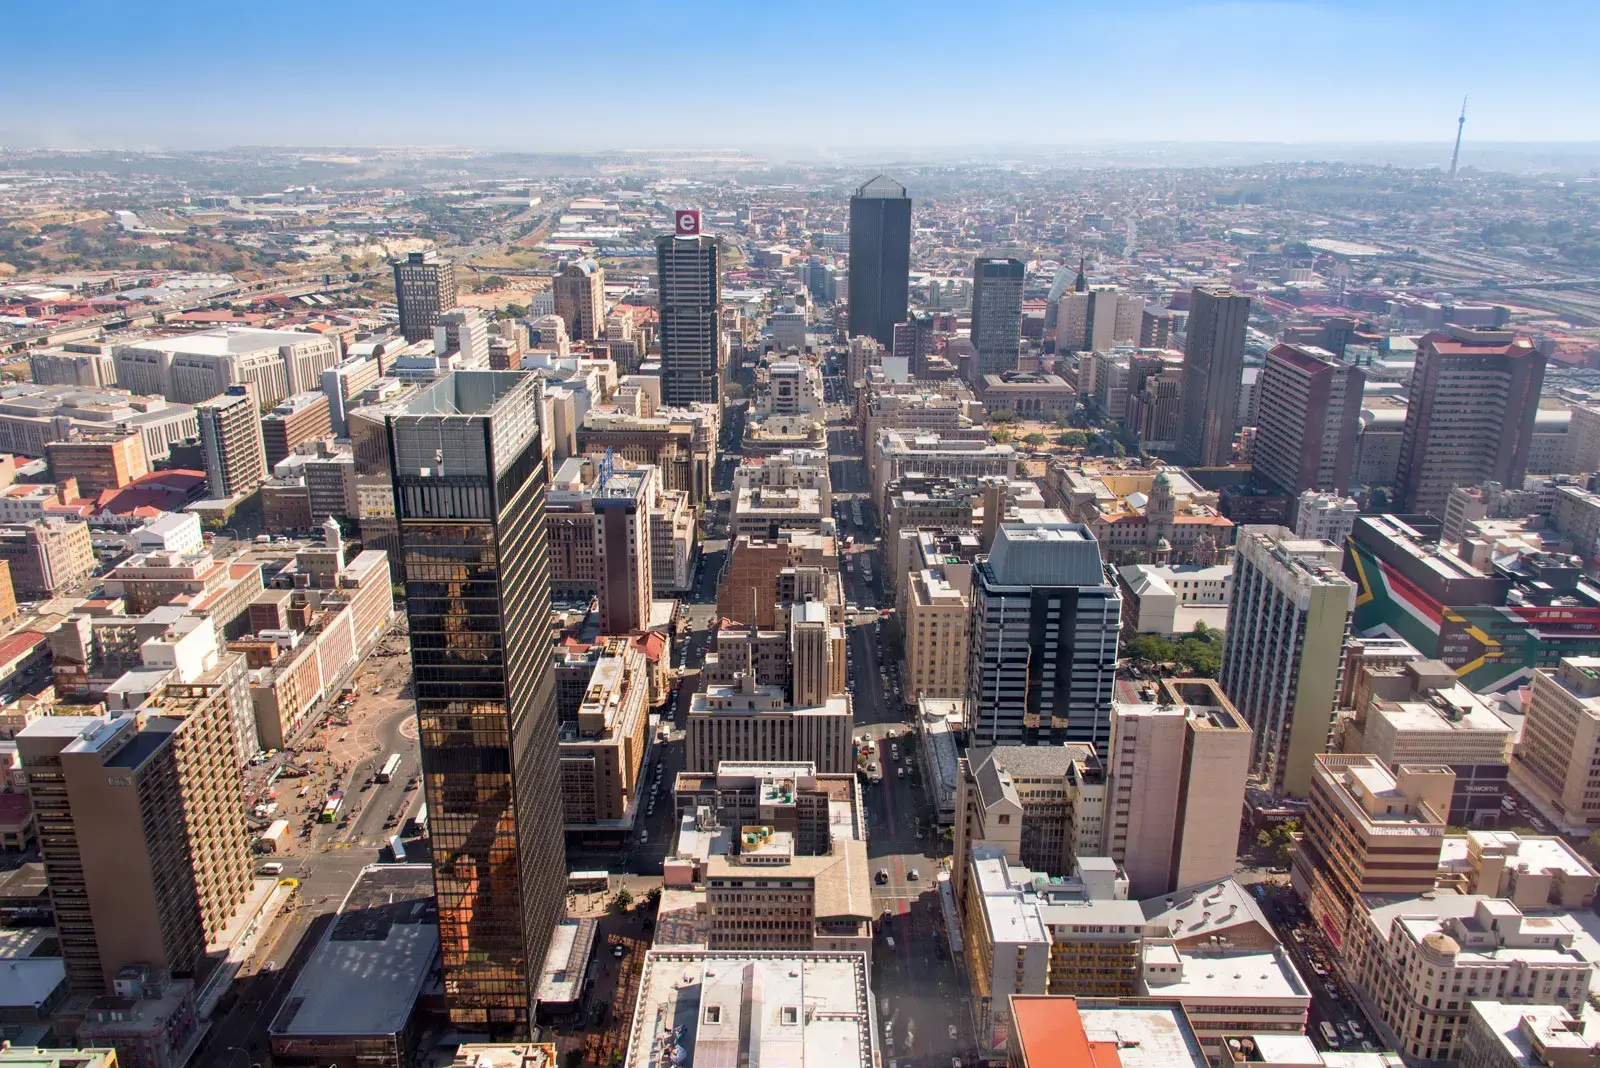 Earthquake hits Johannesburg, South Africa's largest city